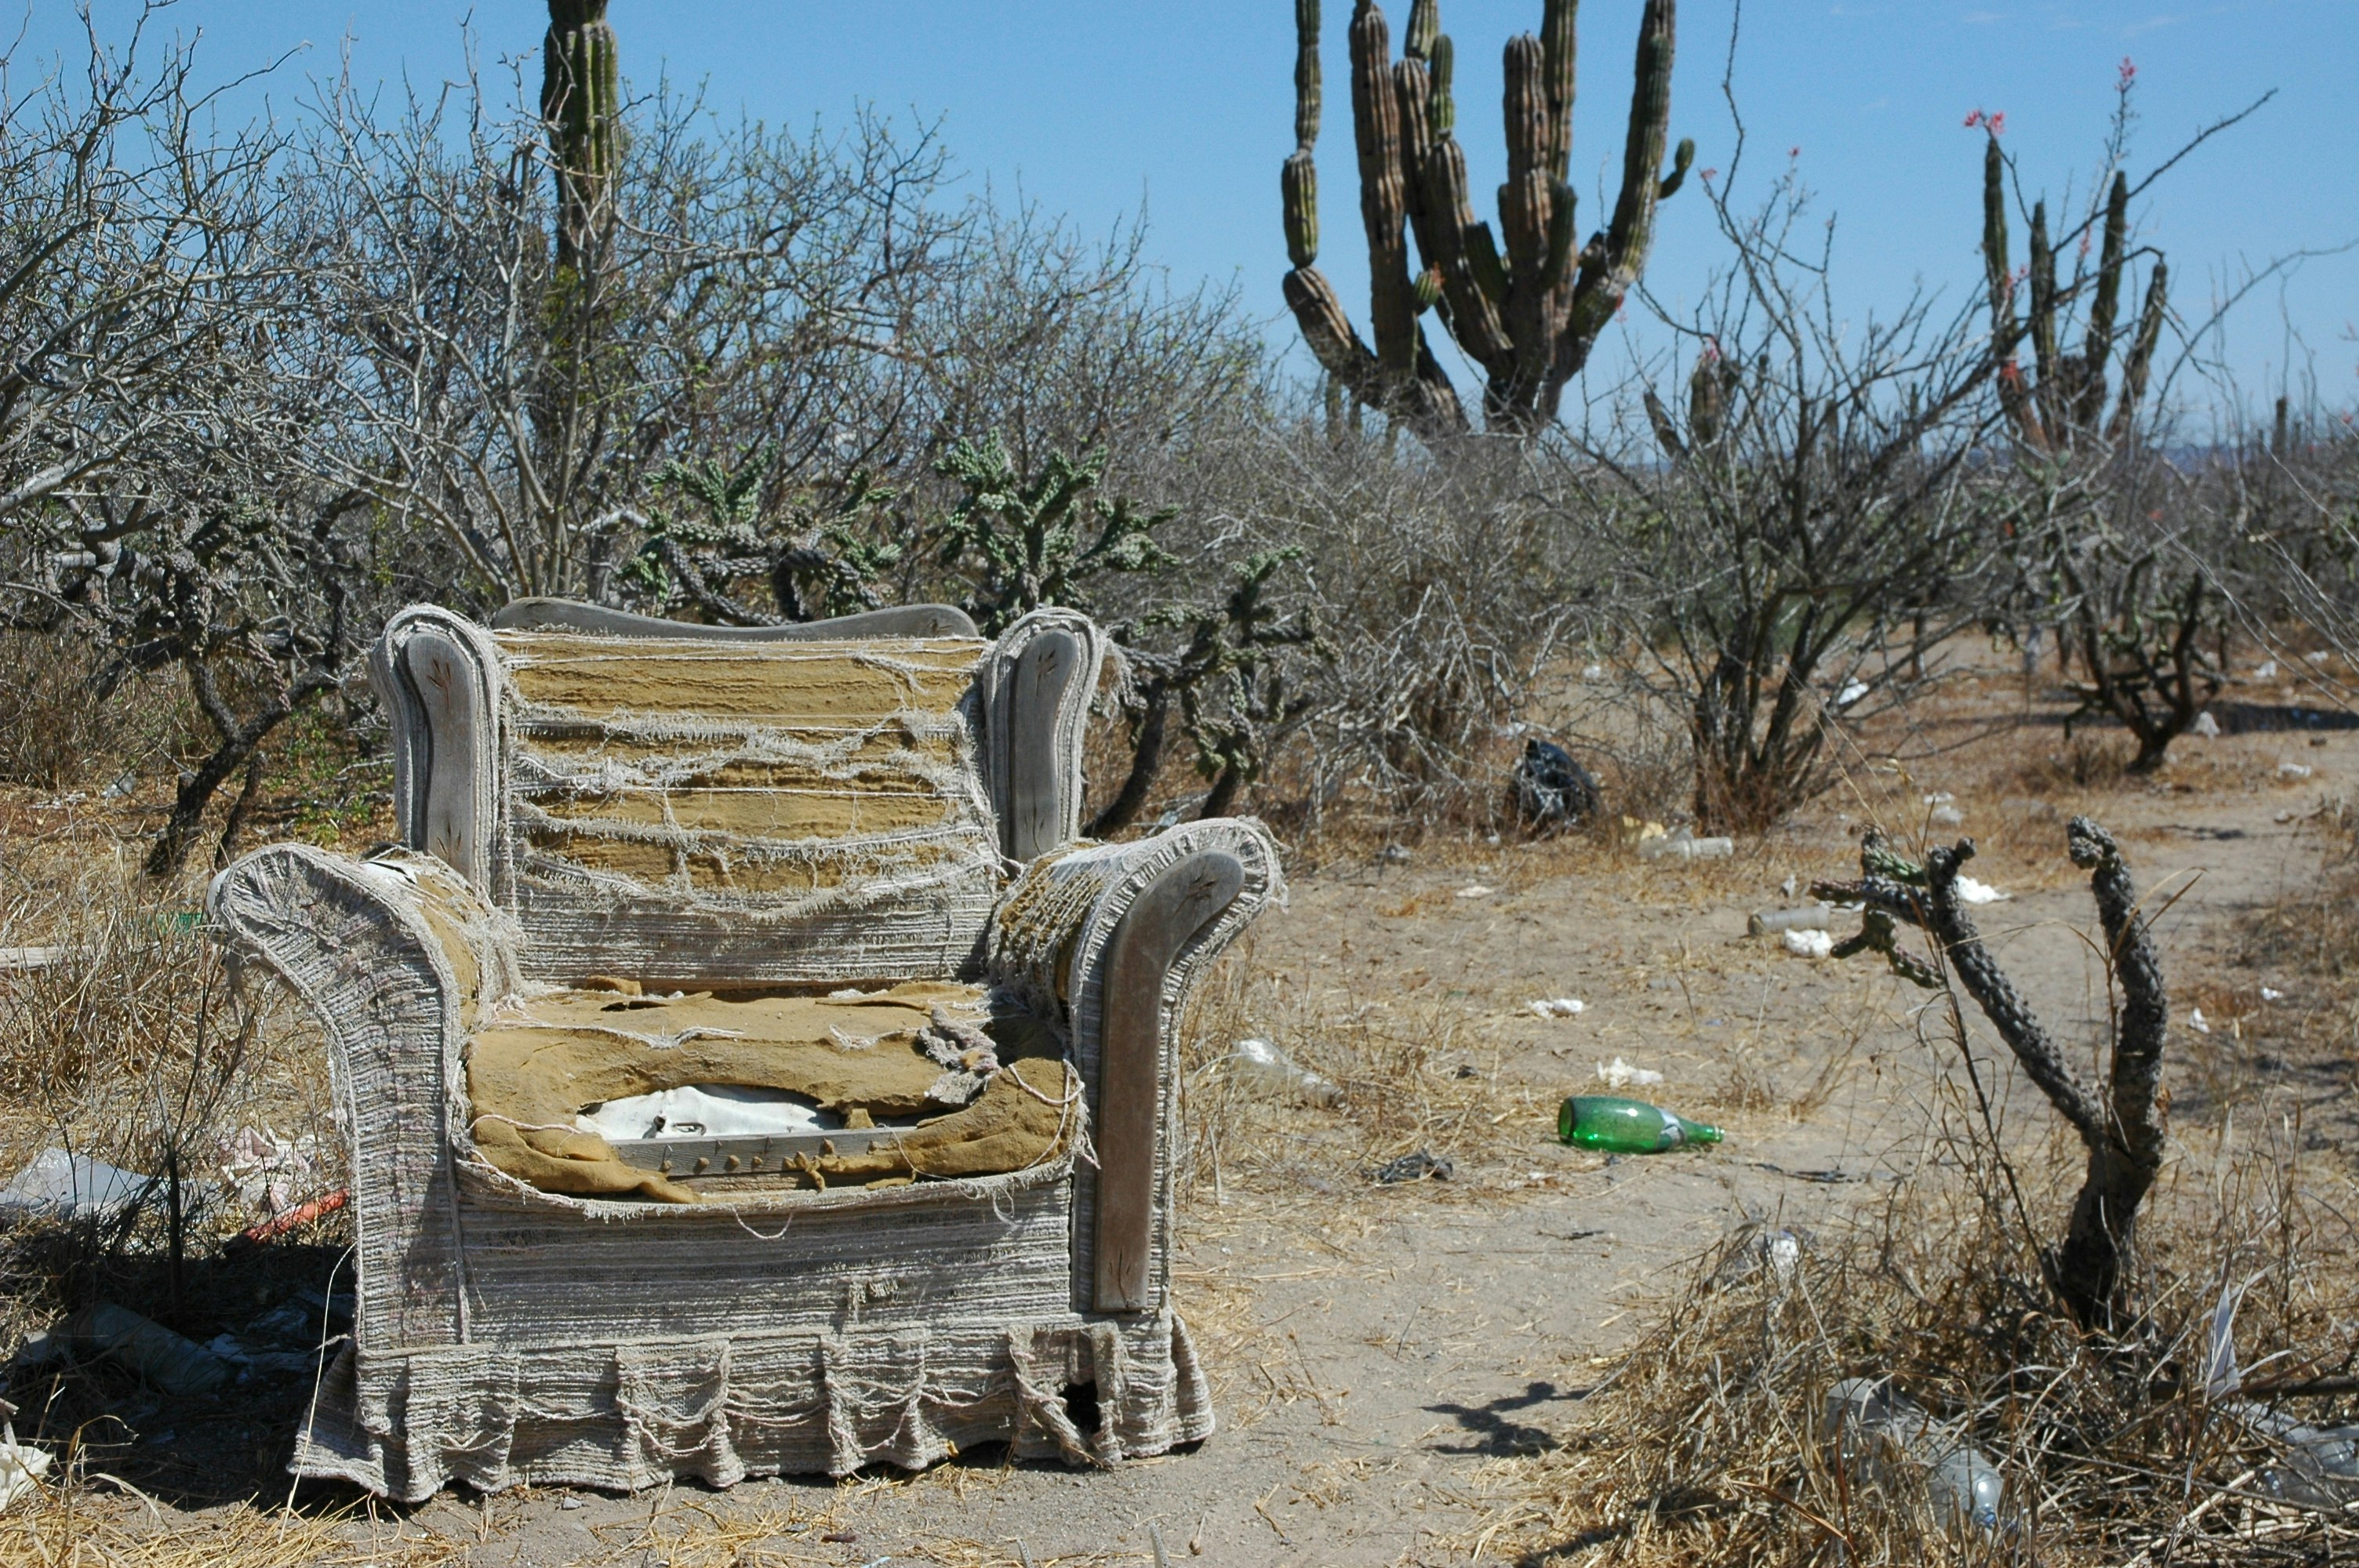 Armchair philosophy; All the comforts of home, roadside worship area, worn out armchair abandoned in the desert, near La Paz, Baja California Sur, Mexico